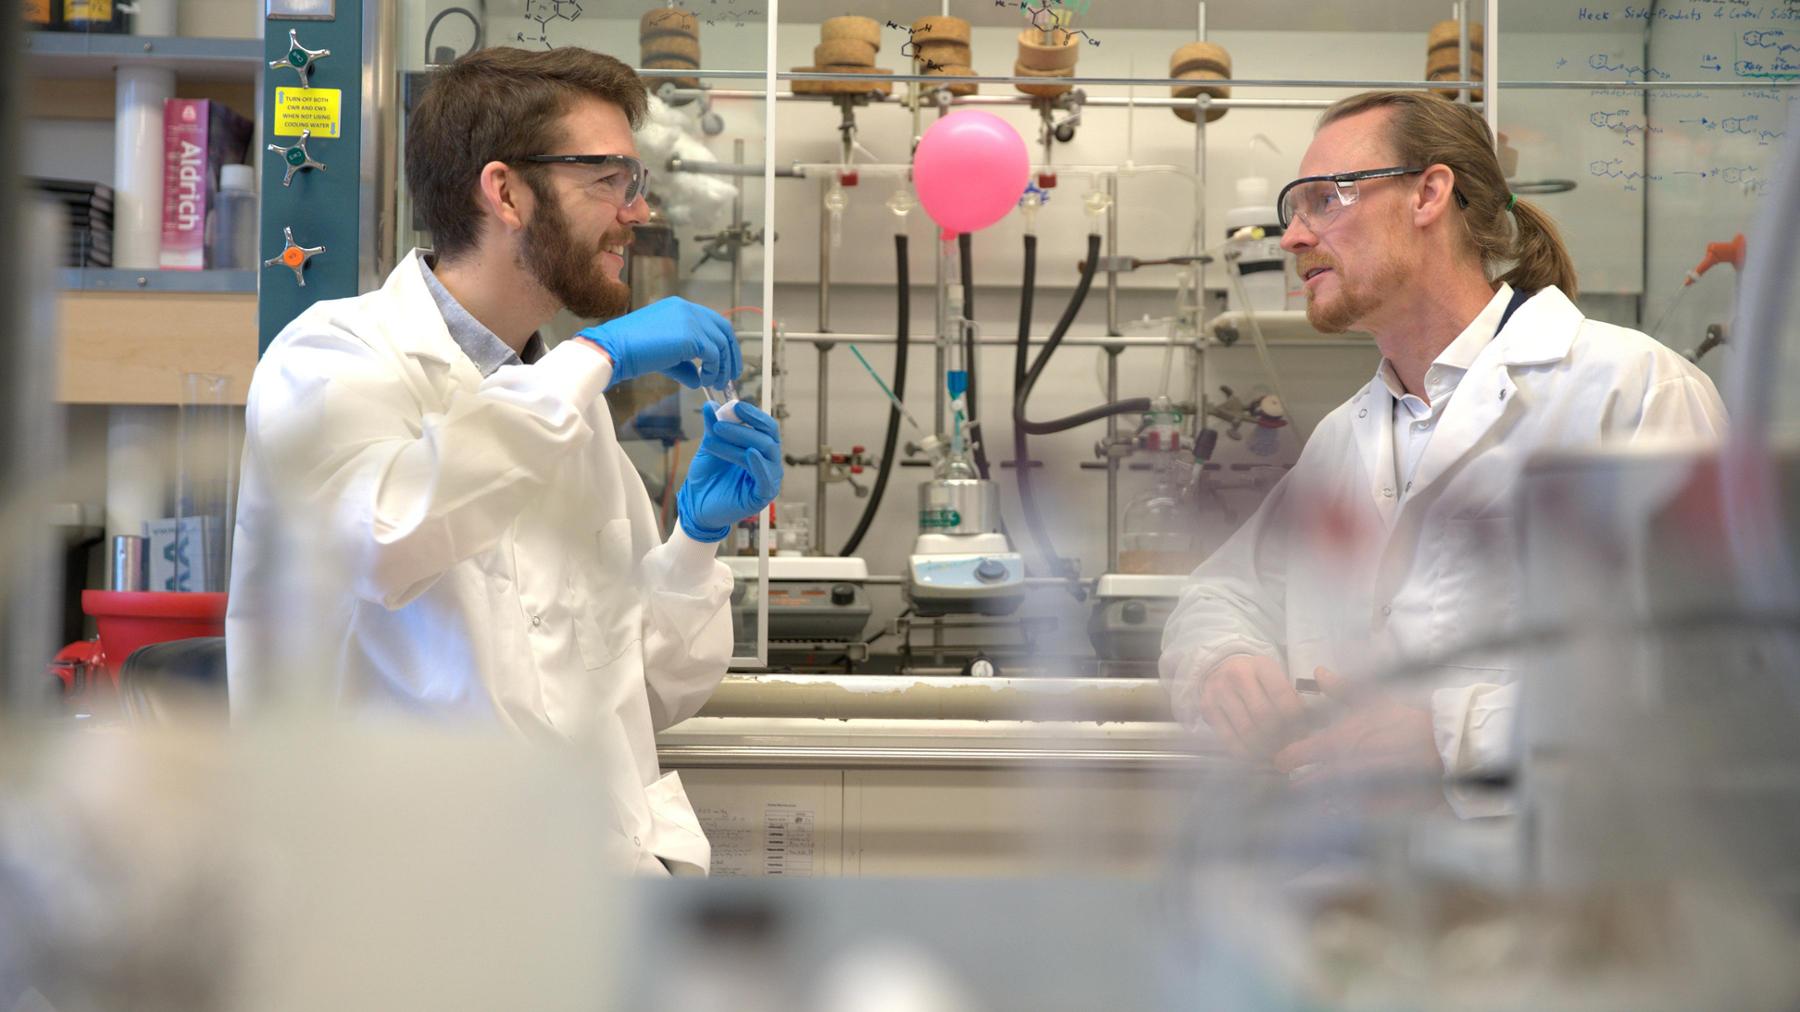 Two graduate students collaborating on work in a university lab.